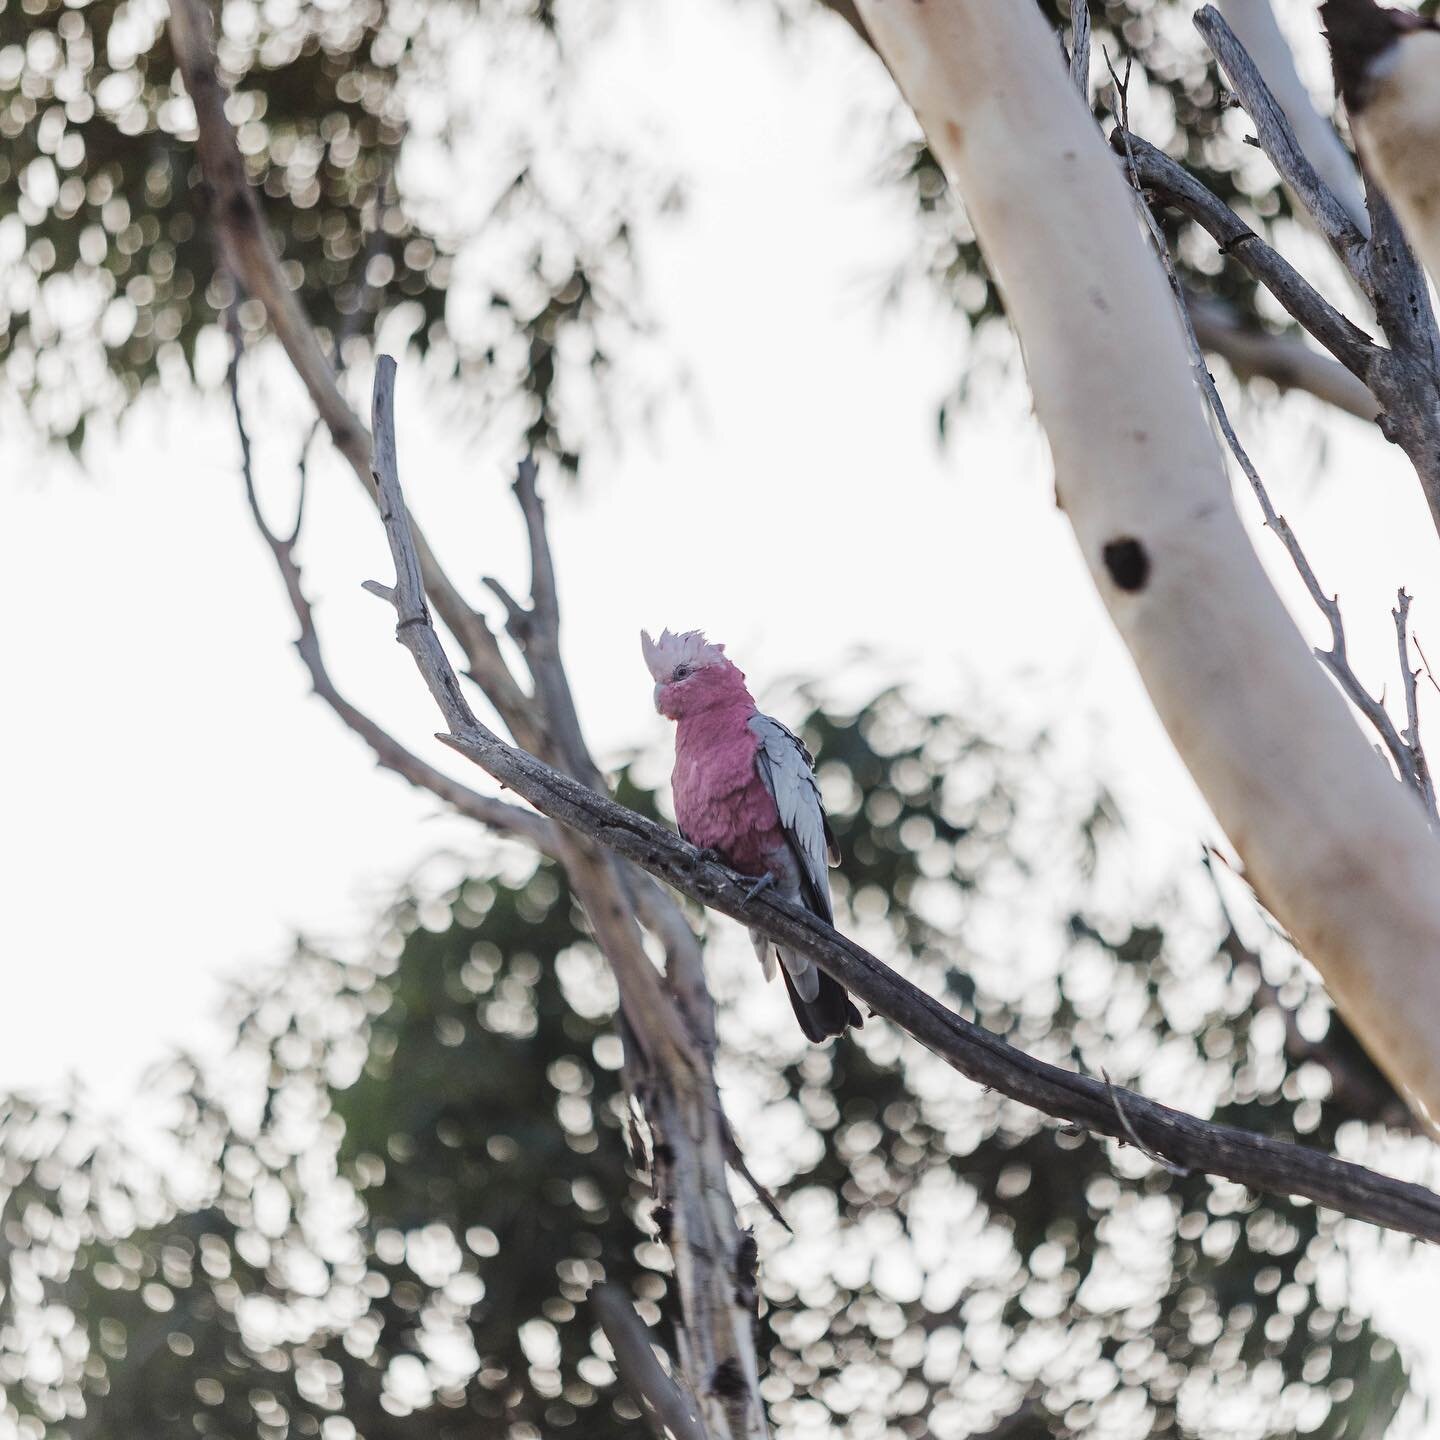 Every time I visit my mums there are a pair of Galahs that come to this tree every afternoon. This particular day only 1 showed up long enough for me to snap some photos of him before being on his way again..